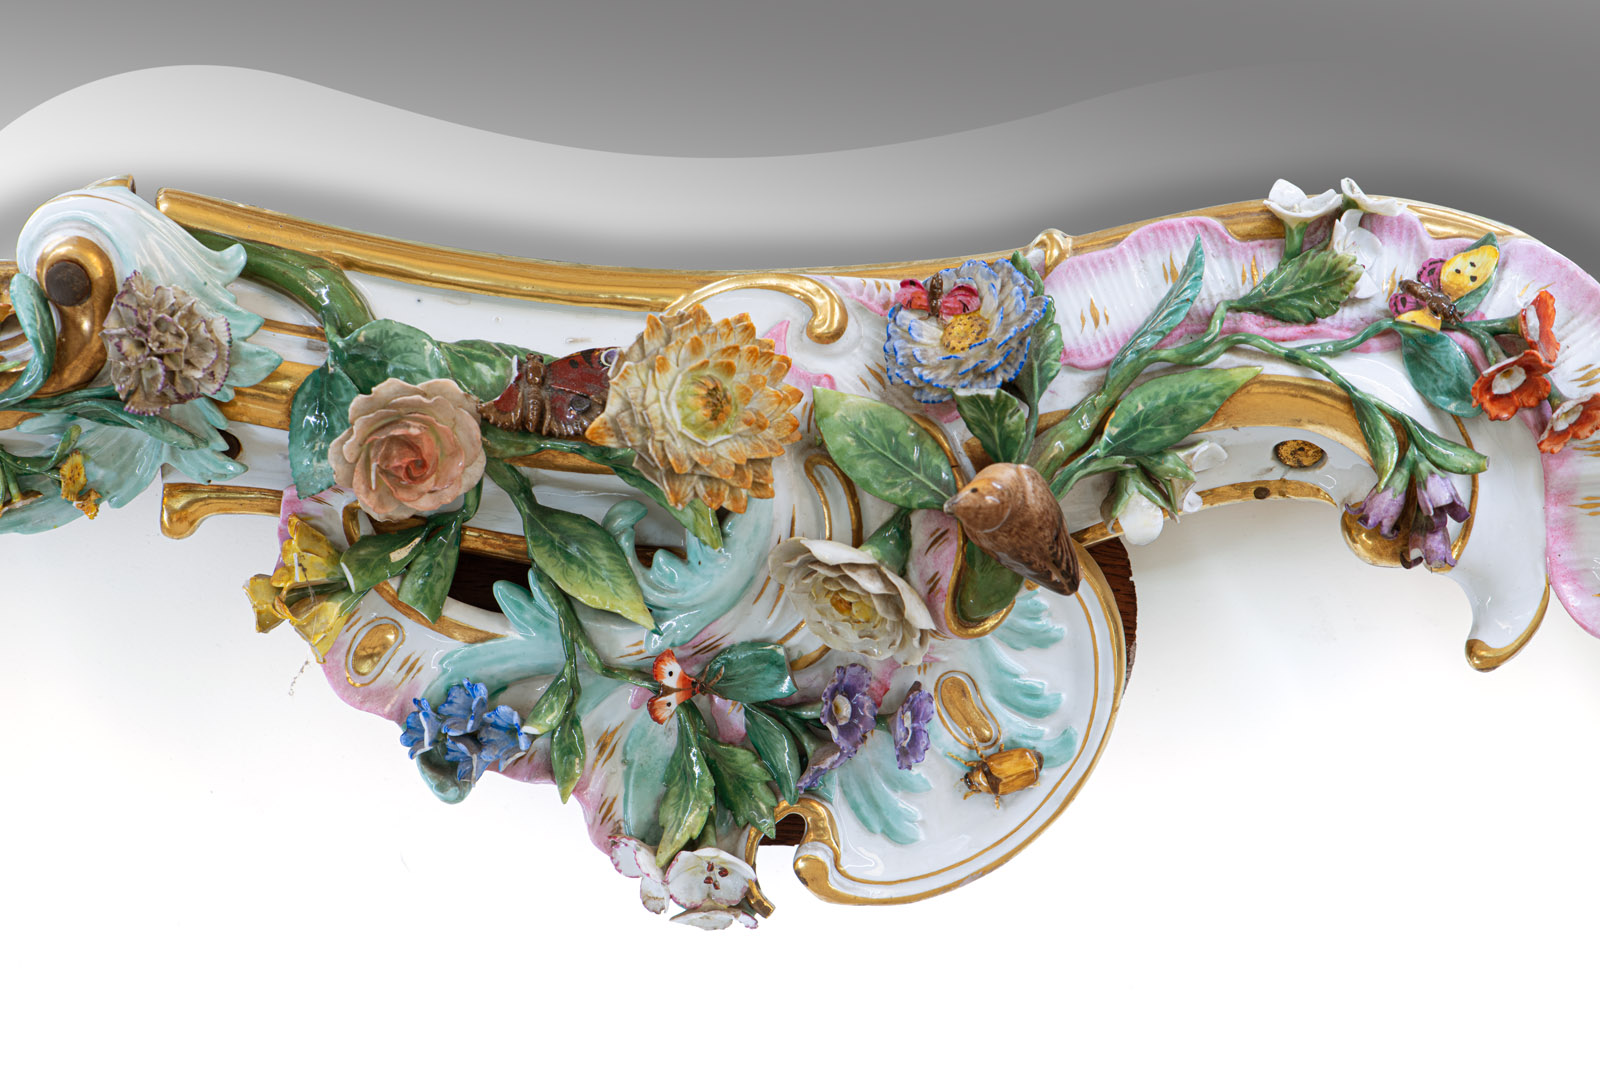 A LARGE ROCOCO STYLE MEISSEN PORCELAIN WALL MIRROR - Image 2 of 11